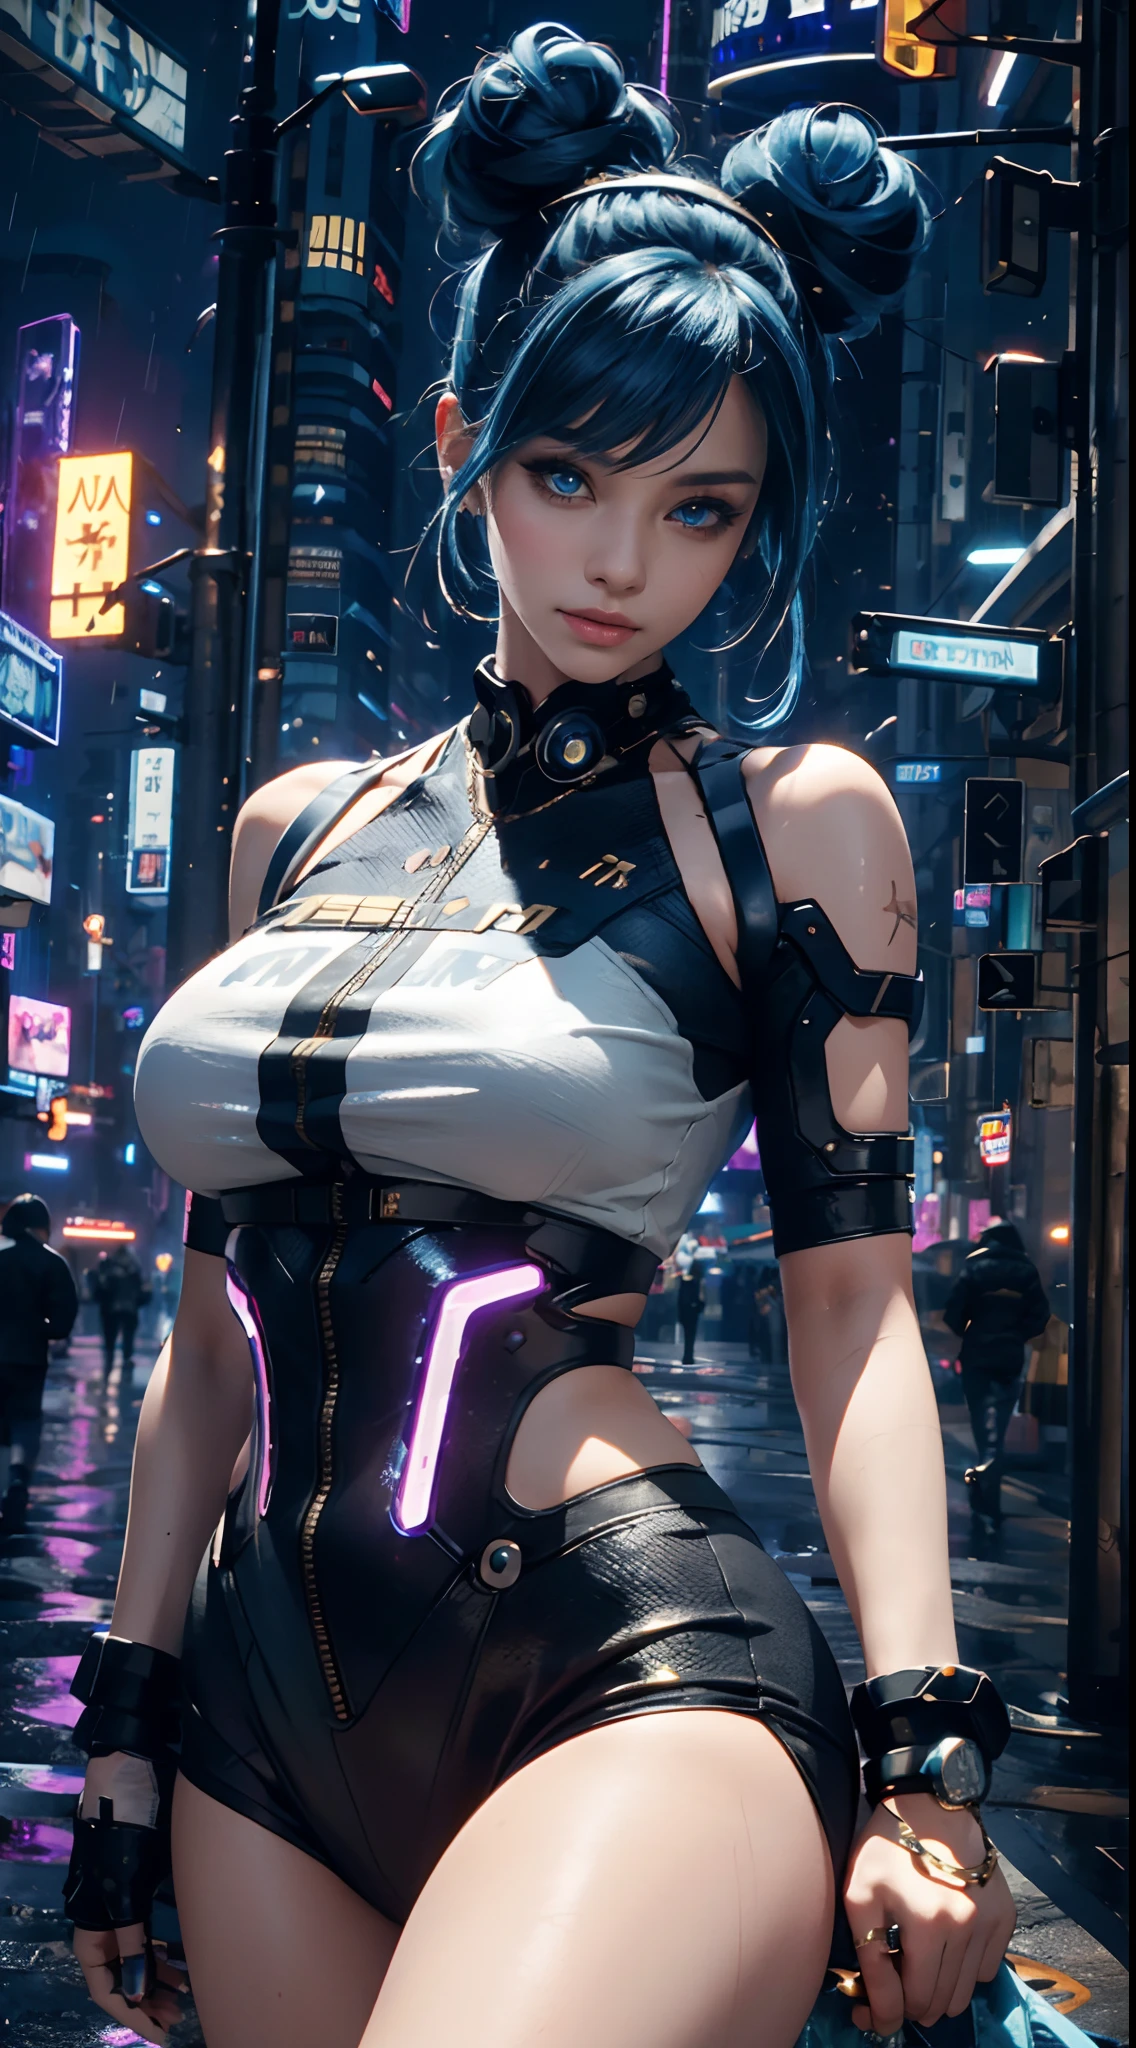 masterpiece, maximum quality, ultra high resolution, 8k, a girl,beauty,21years old,fair skin, extremely beautiful,white pupil, alone,bust portrait,cyberpunk outfit, extremely detailed face, detailed eyes, mischievous smile, cheerful, realistic photo, totally realistic, human pelle, studio lighting,golden ratio body, wide hips,perfect legs, big ass,blue hair, double buns,blunt bangs,black clothing,D-cup breasts,in the cyberpunk city,cyberpunk city background,((night)),rain,side pose